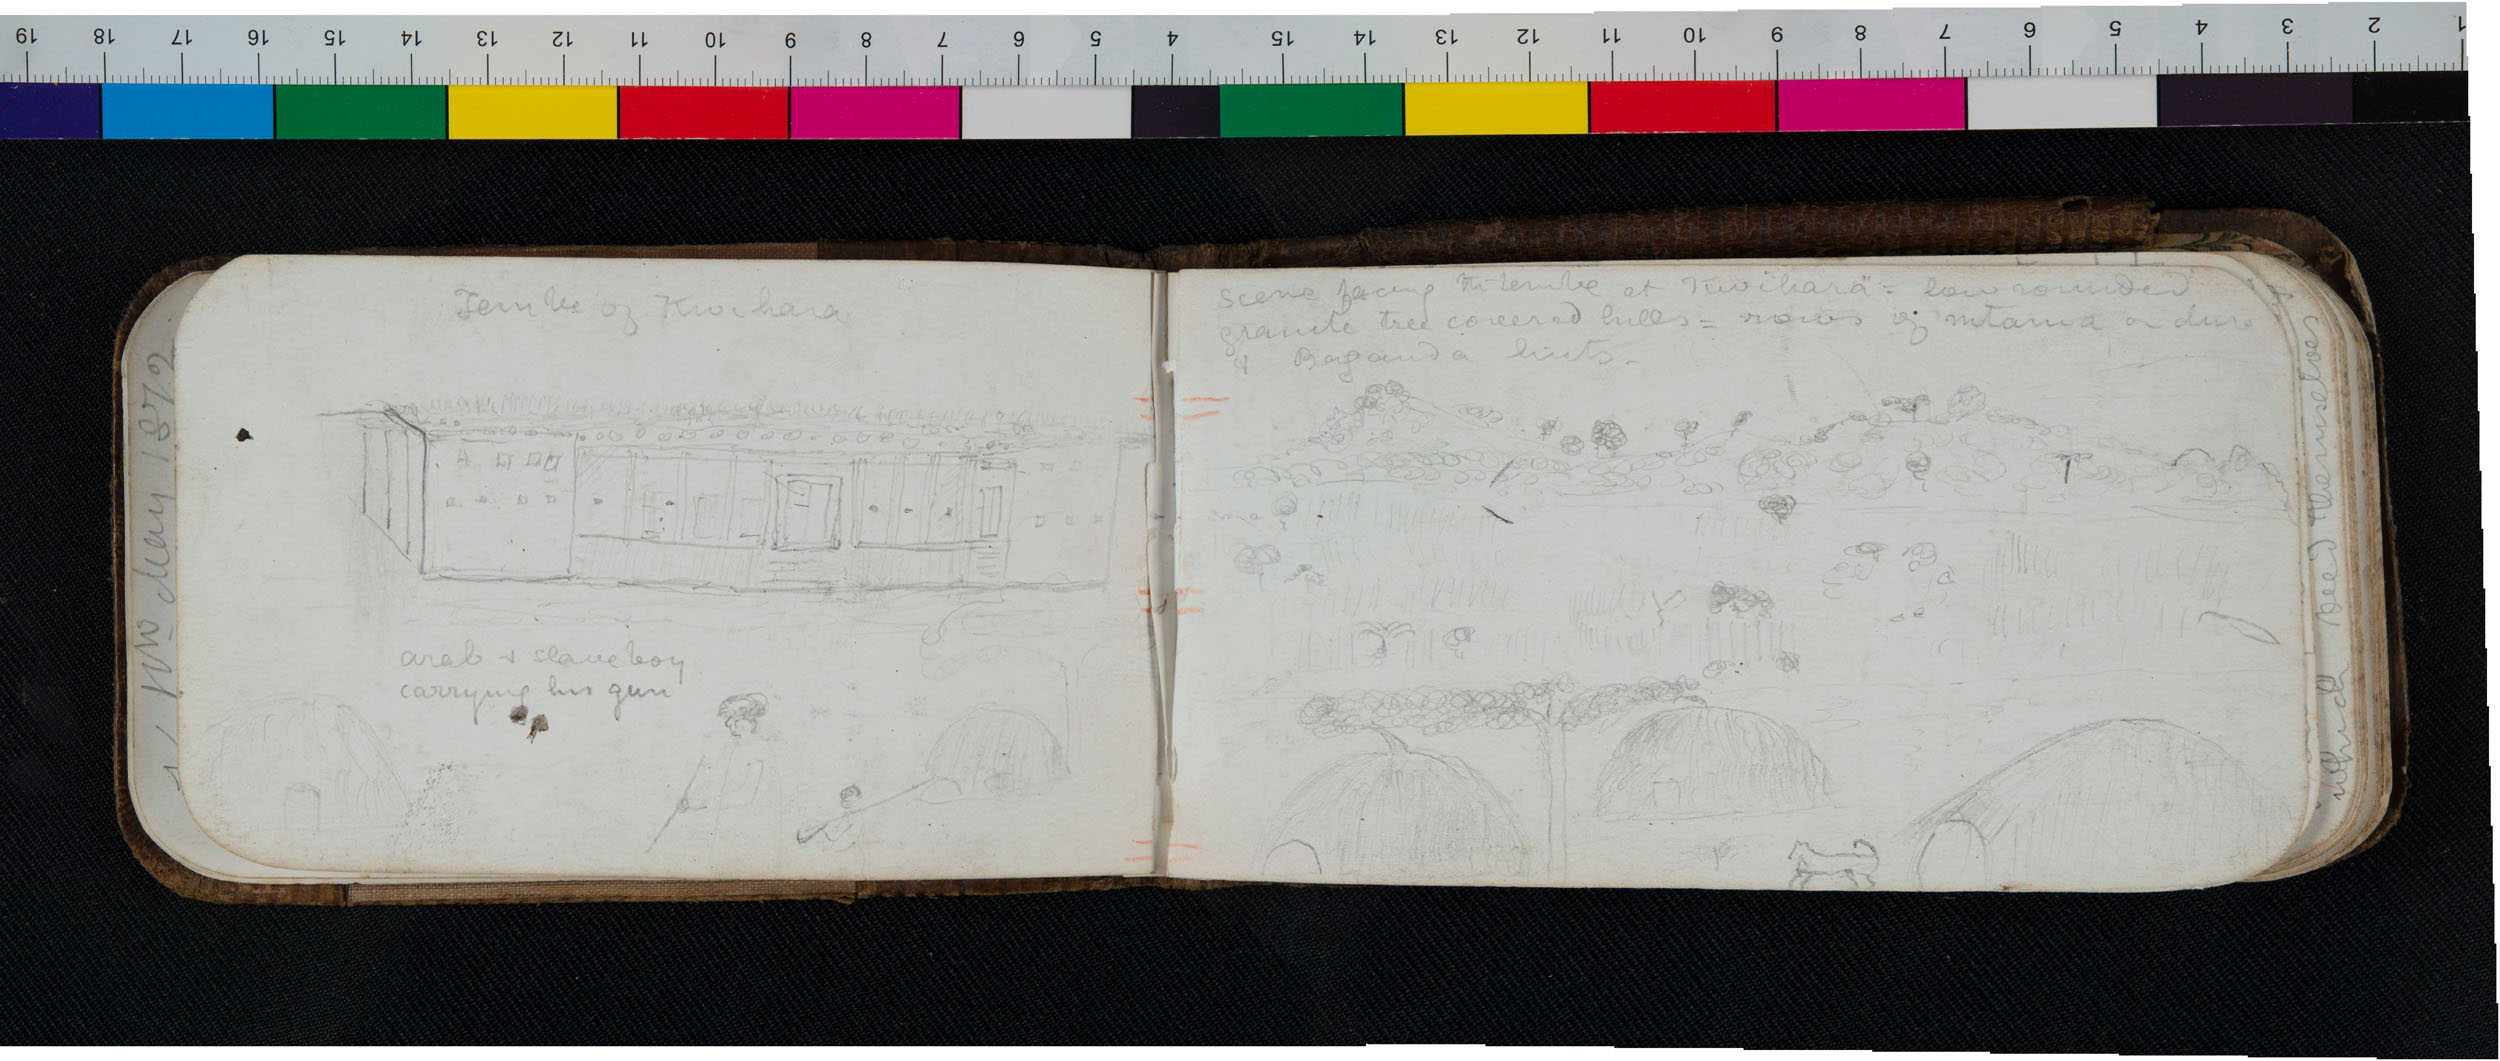 An image of two pages of Field Diary XIV (Livingstone 1871n:[98]-[99]). Copyright David Livingstone Centre. Creative Commons Attribution-NonCommercial 3.0 Unported (https://creativecommons.org/licenses/by-nc/3.0/).